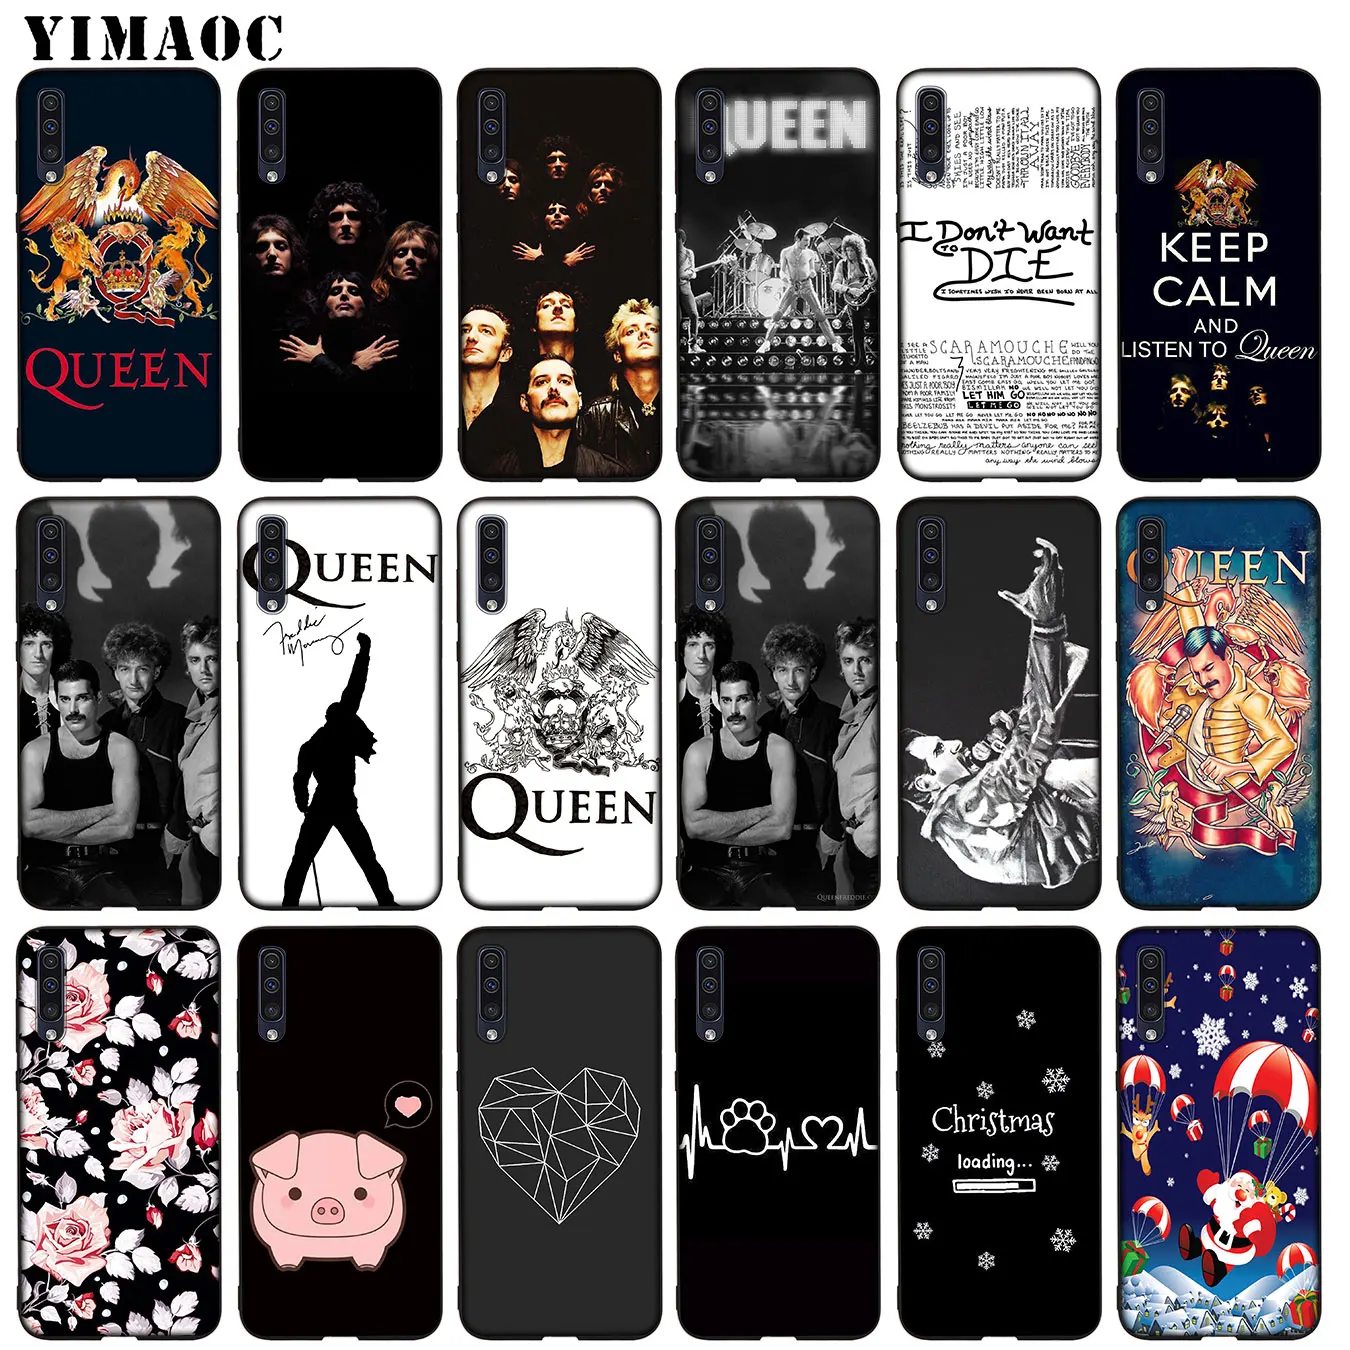 

YIMAOC Queen Rock Group Soft TPU Silicone Case for Samsung Galaxy A70 A60 A50 A40 A30 A20 A10 A50S A40S A30S A20S A10S Cover